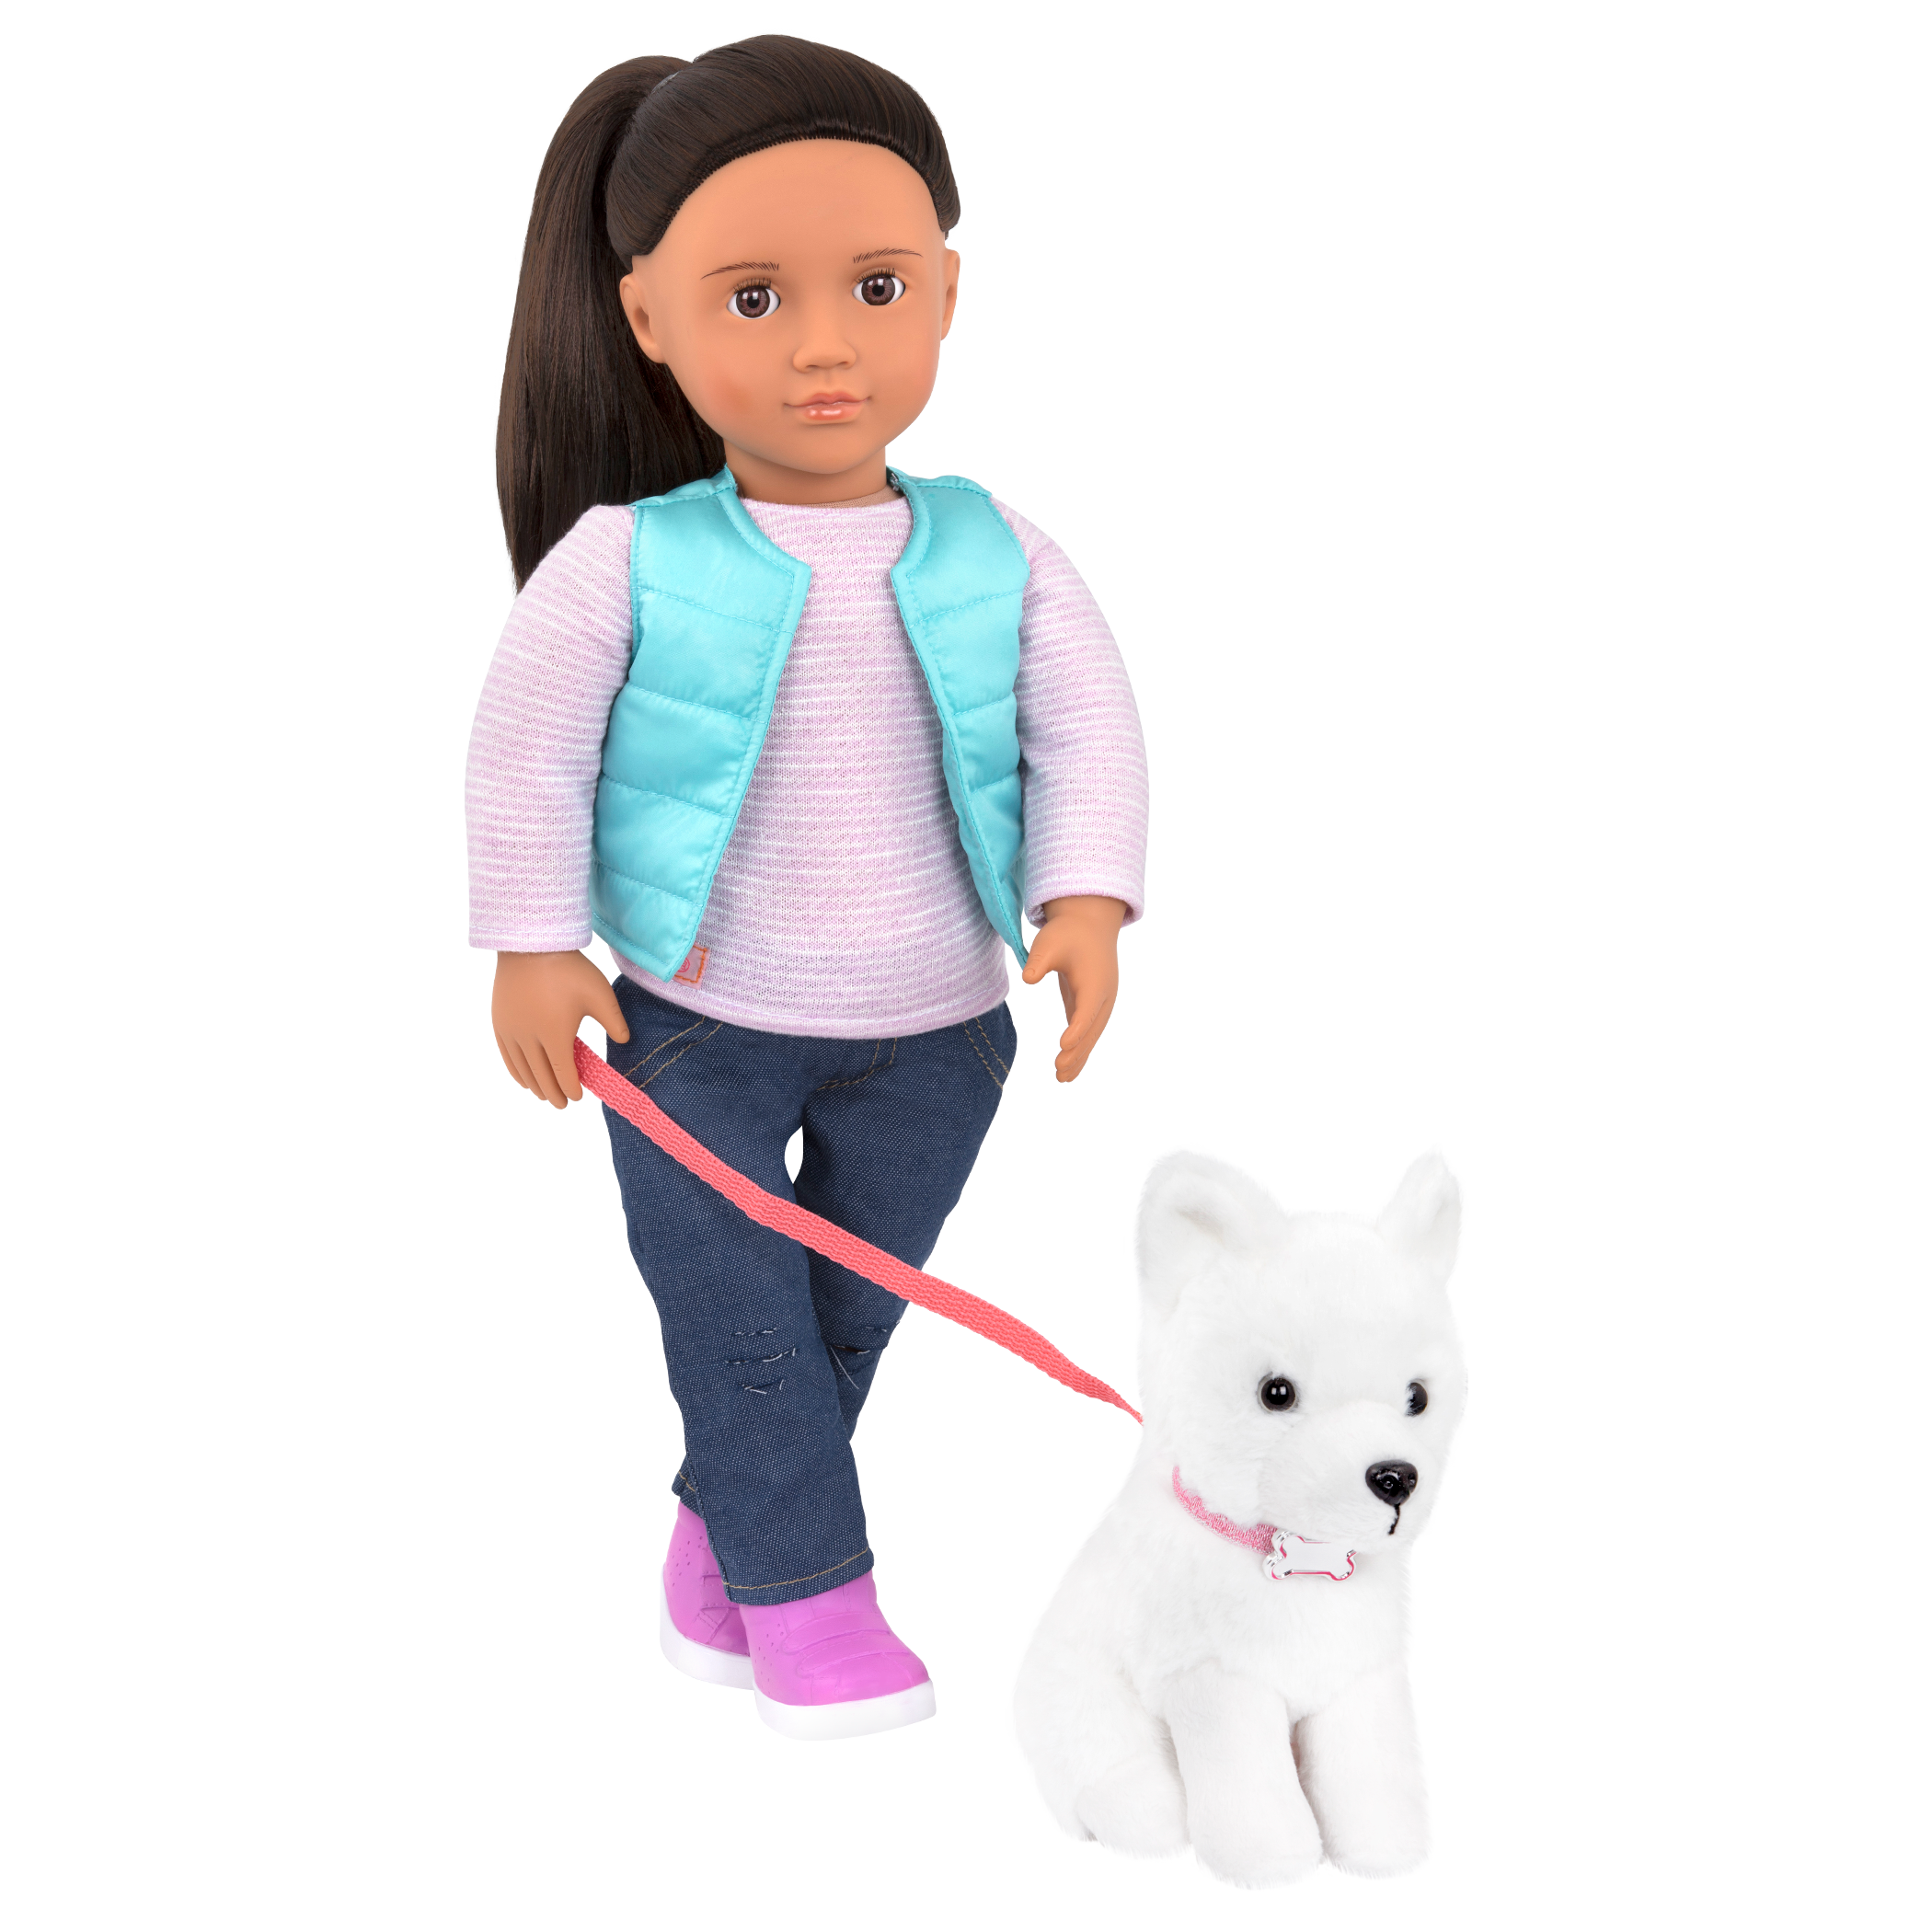 Cassie and Samoyed dog - 18-inch Bambola and pet